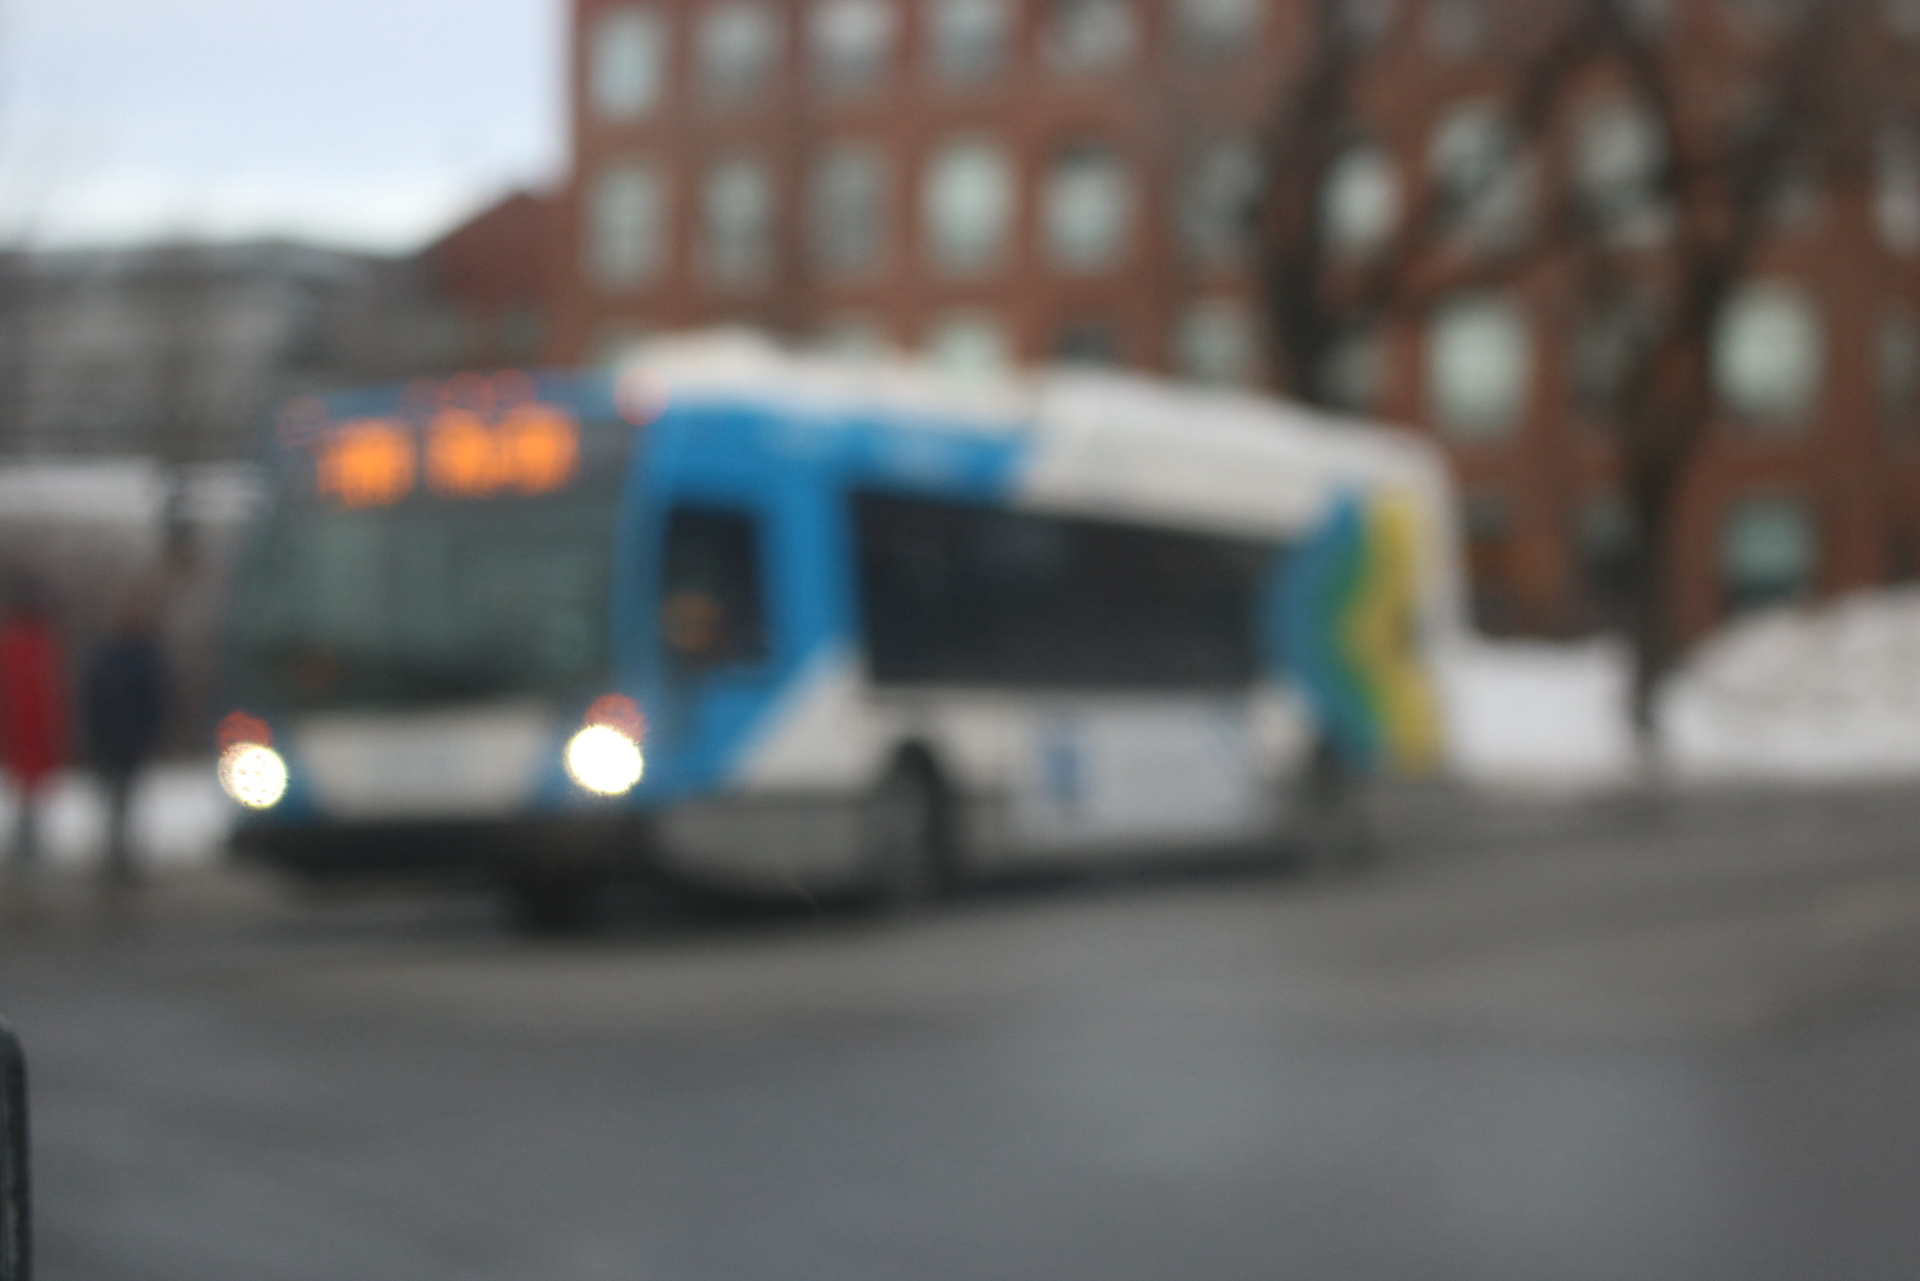 Blurred STM bus on the road